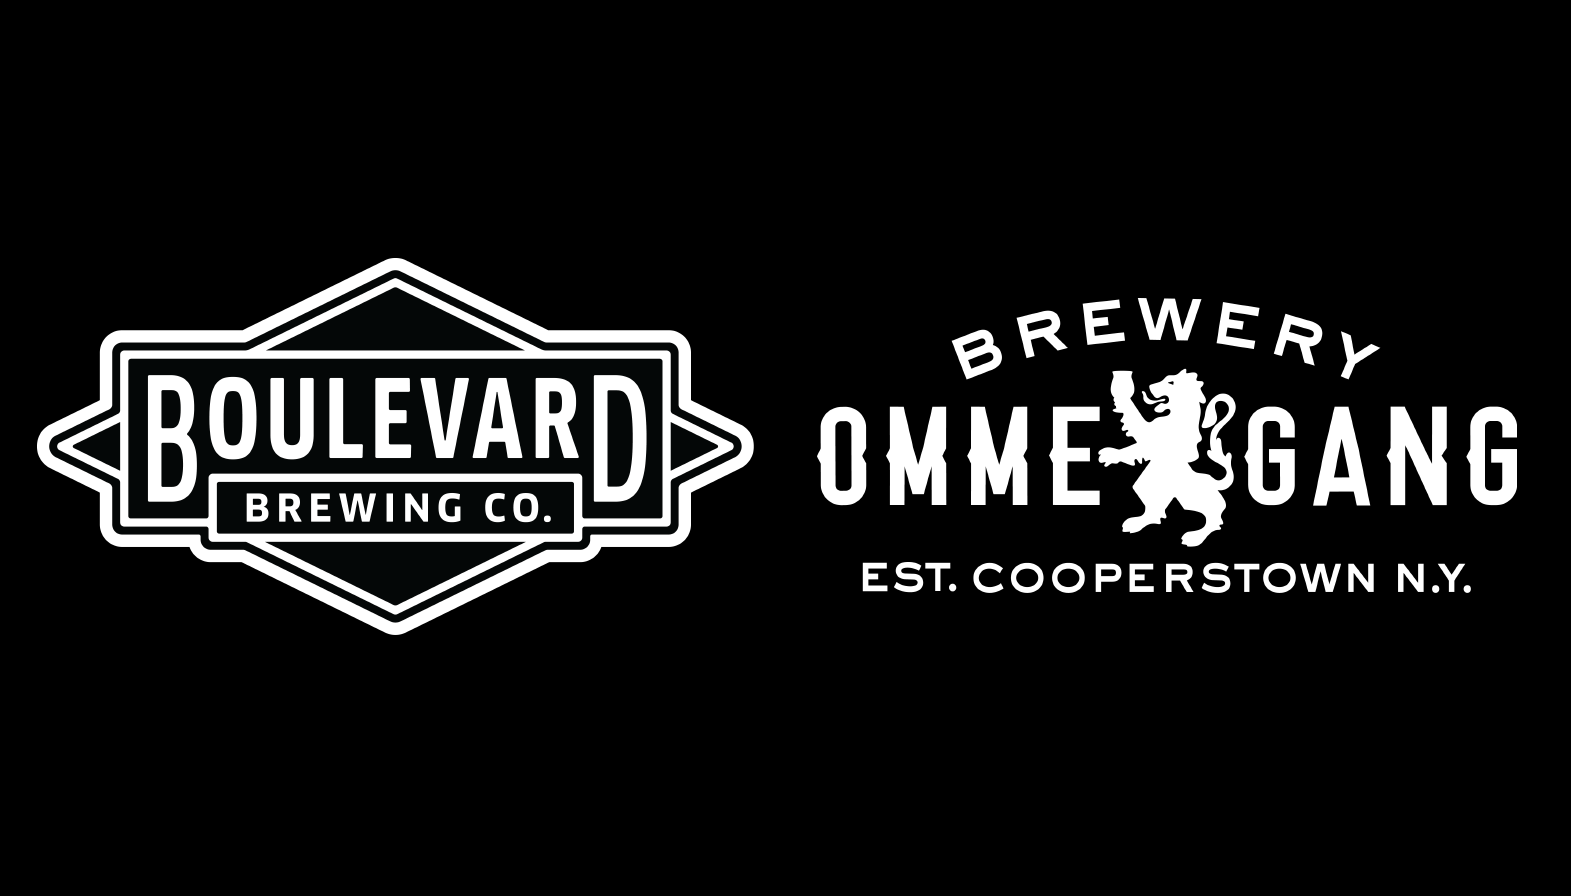 Boulevard and Ommegang tap takeover